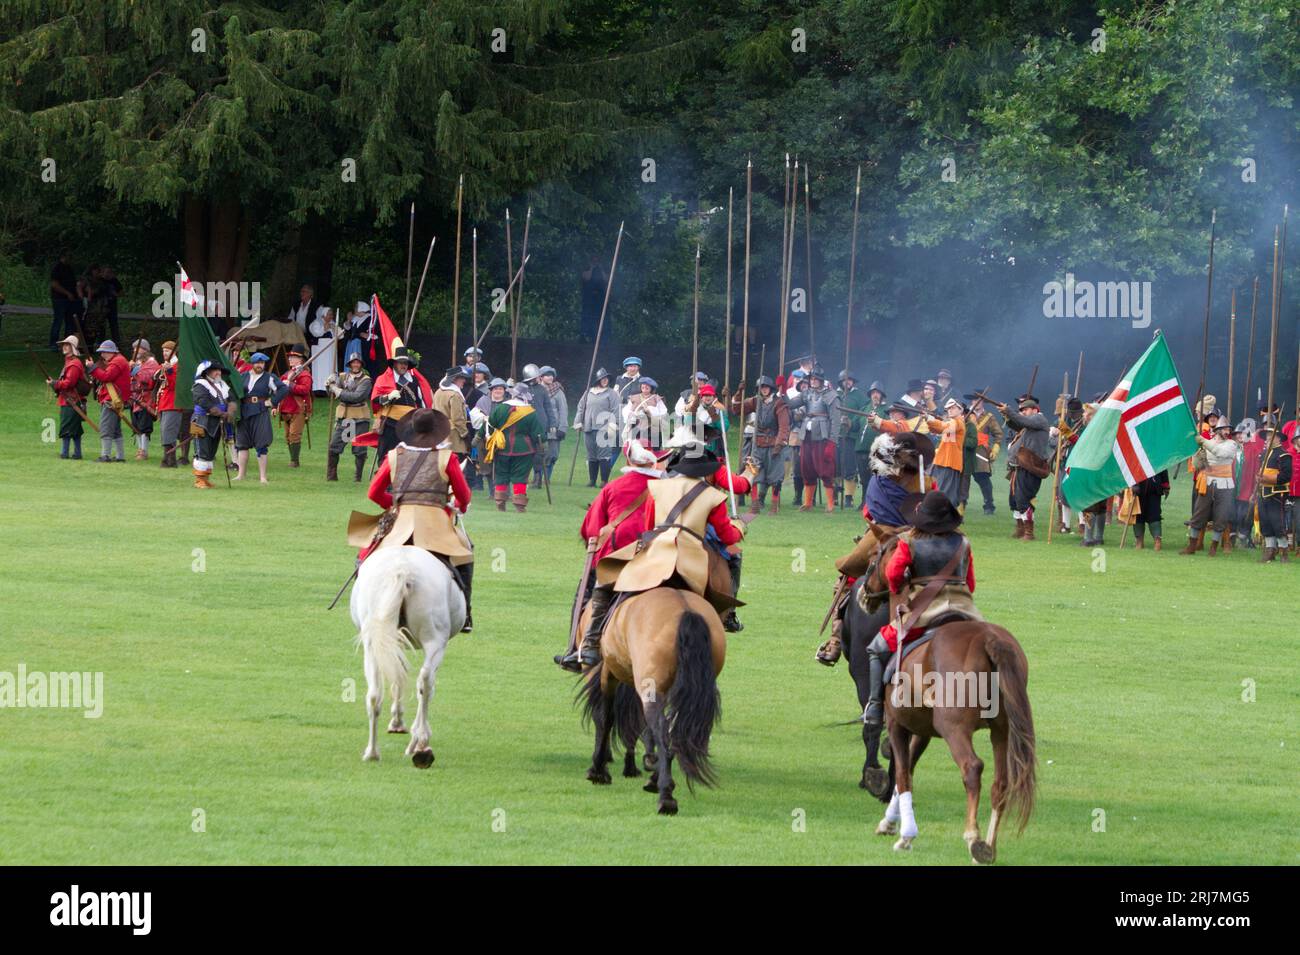 The English Civil War Society re-enact the 1648 Siege of Colchester that took place during the English Civil War. Stock Photo